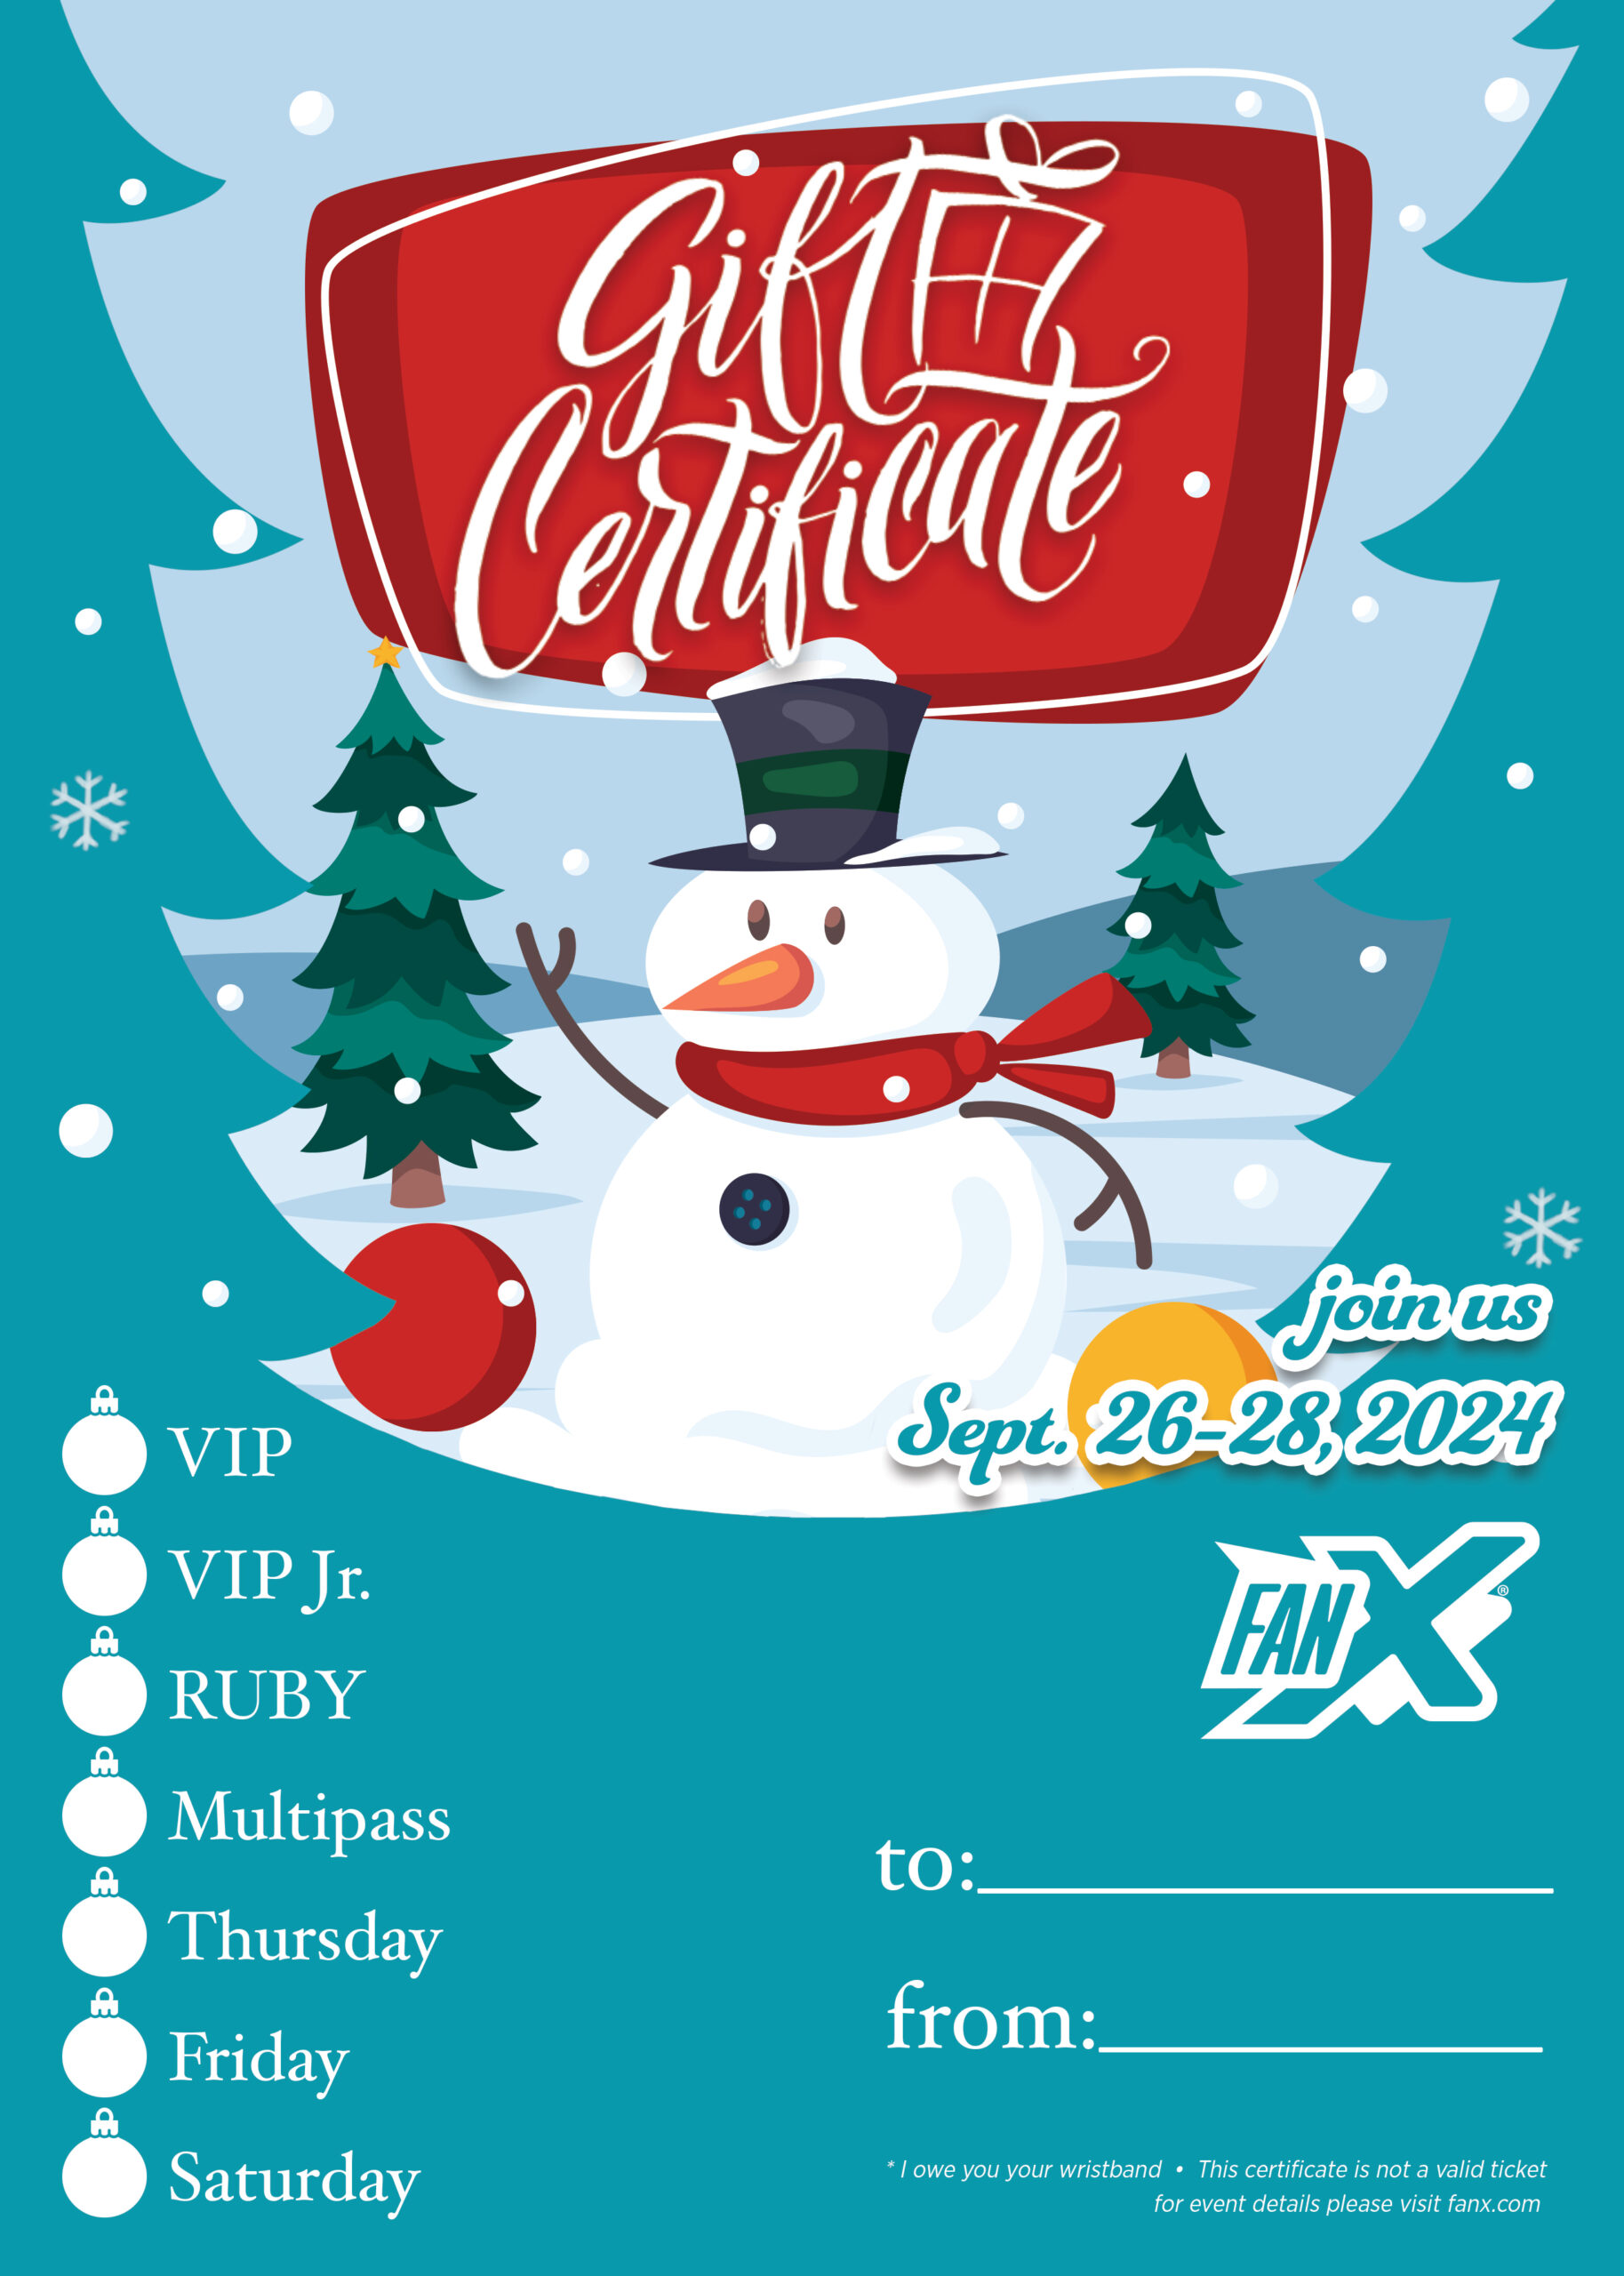 FanX Passes as Holiday Gifts with our Printable Gift Certificate!